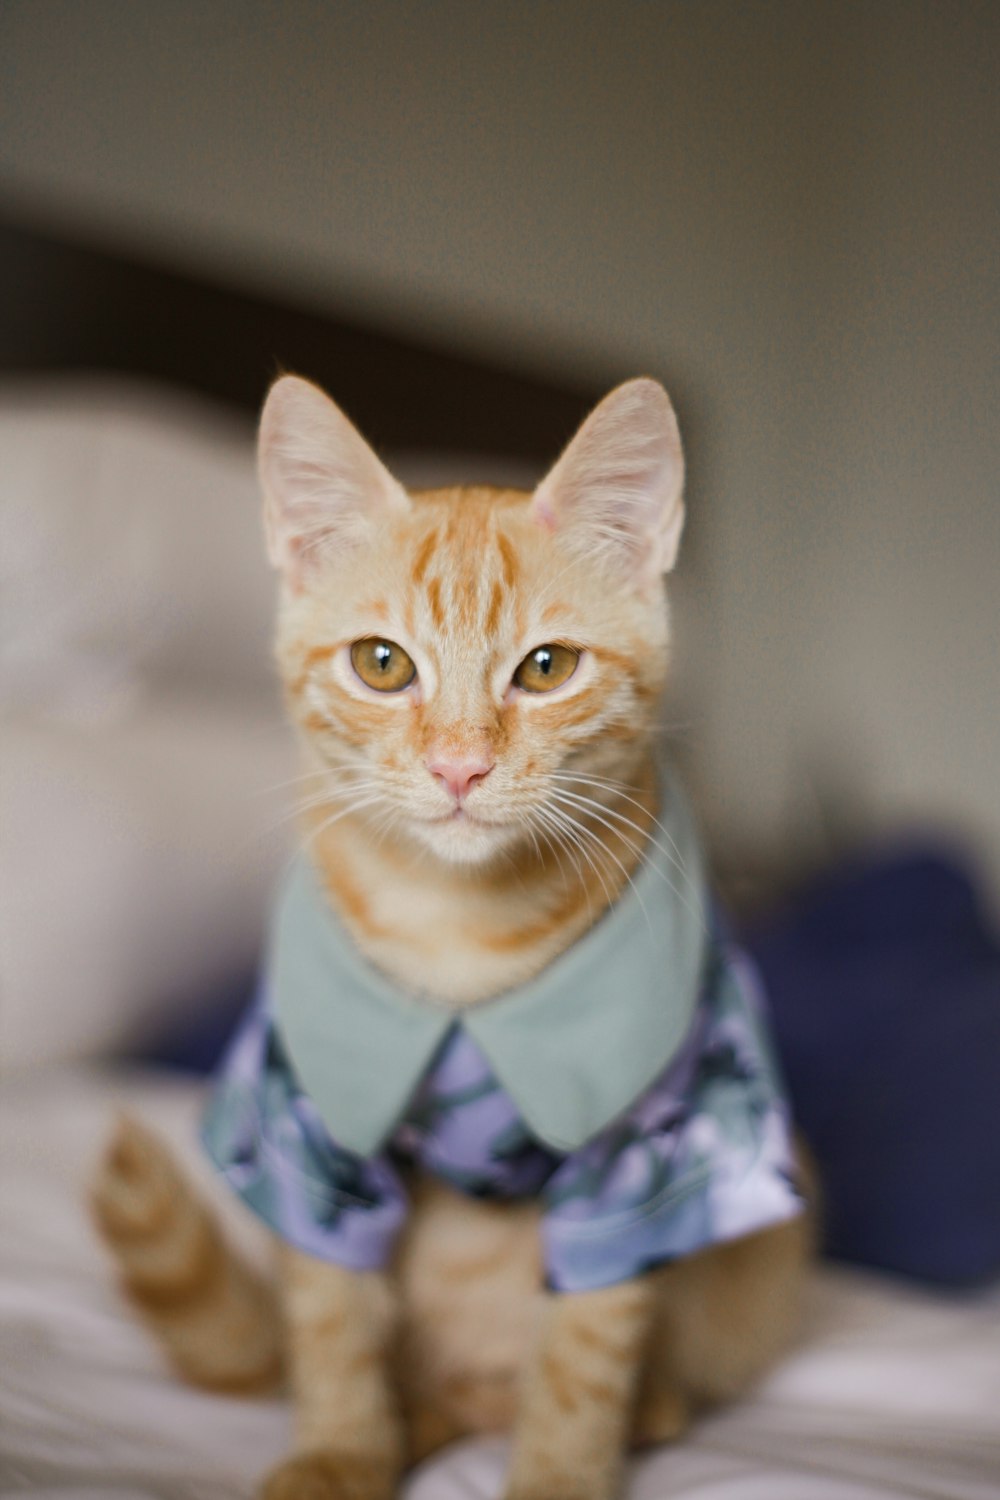 a cat sitting on a bed wearing a shirt